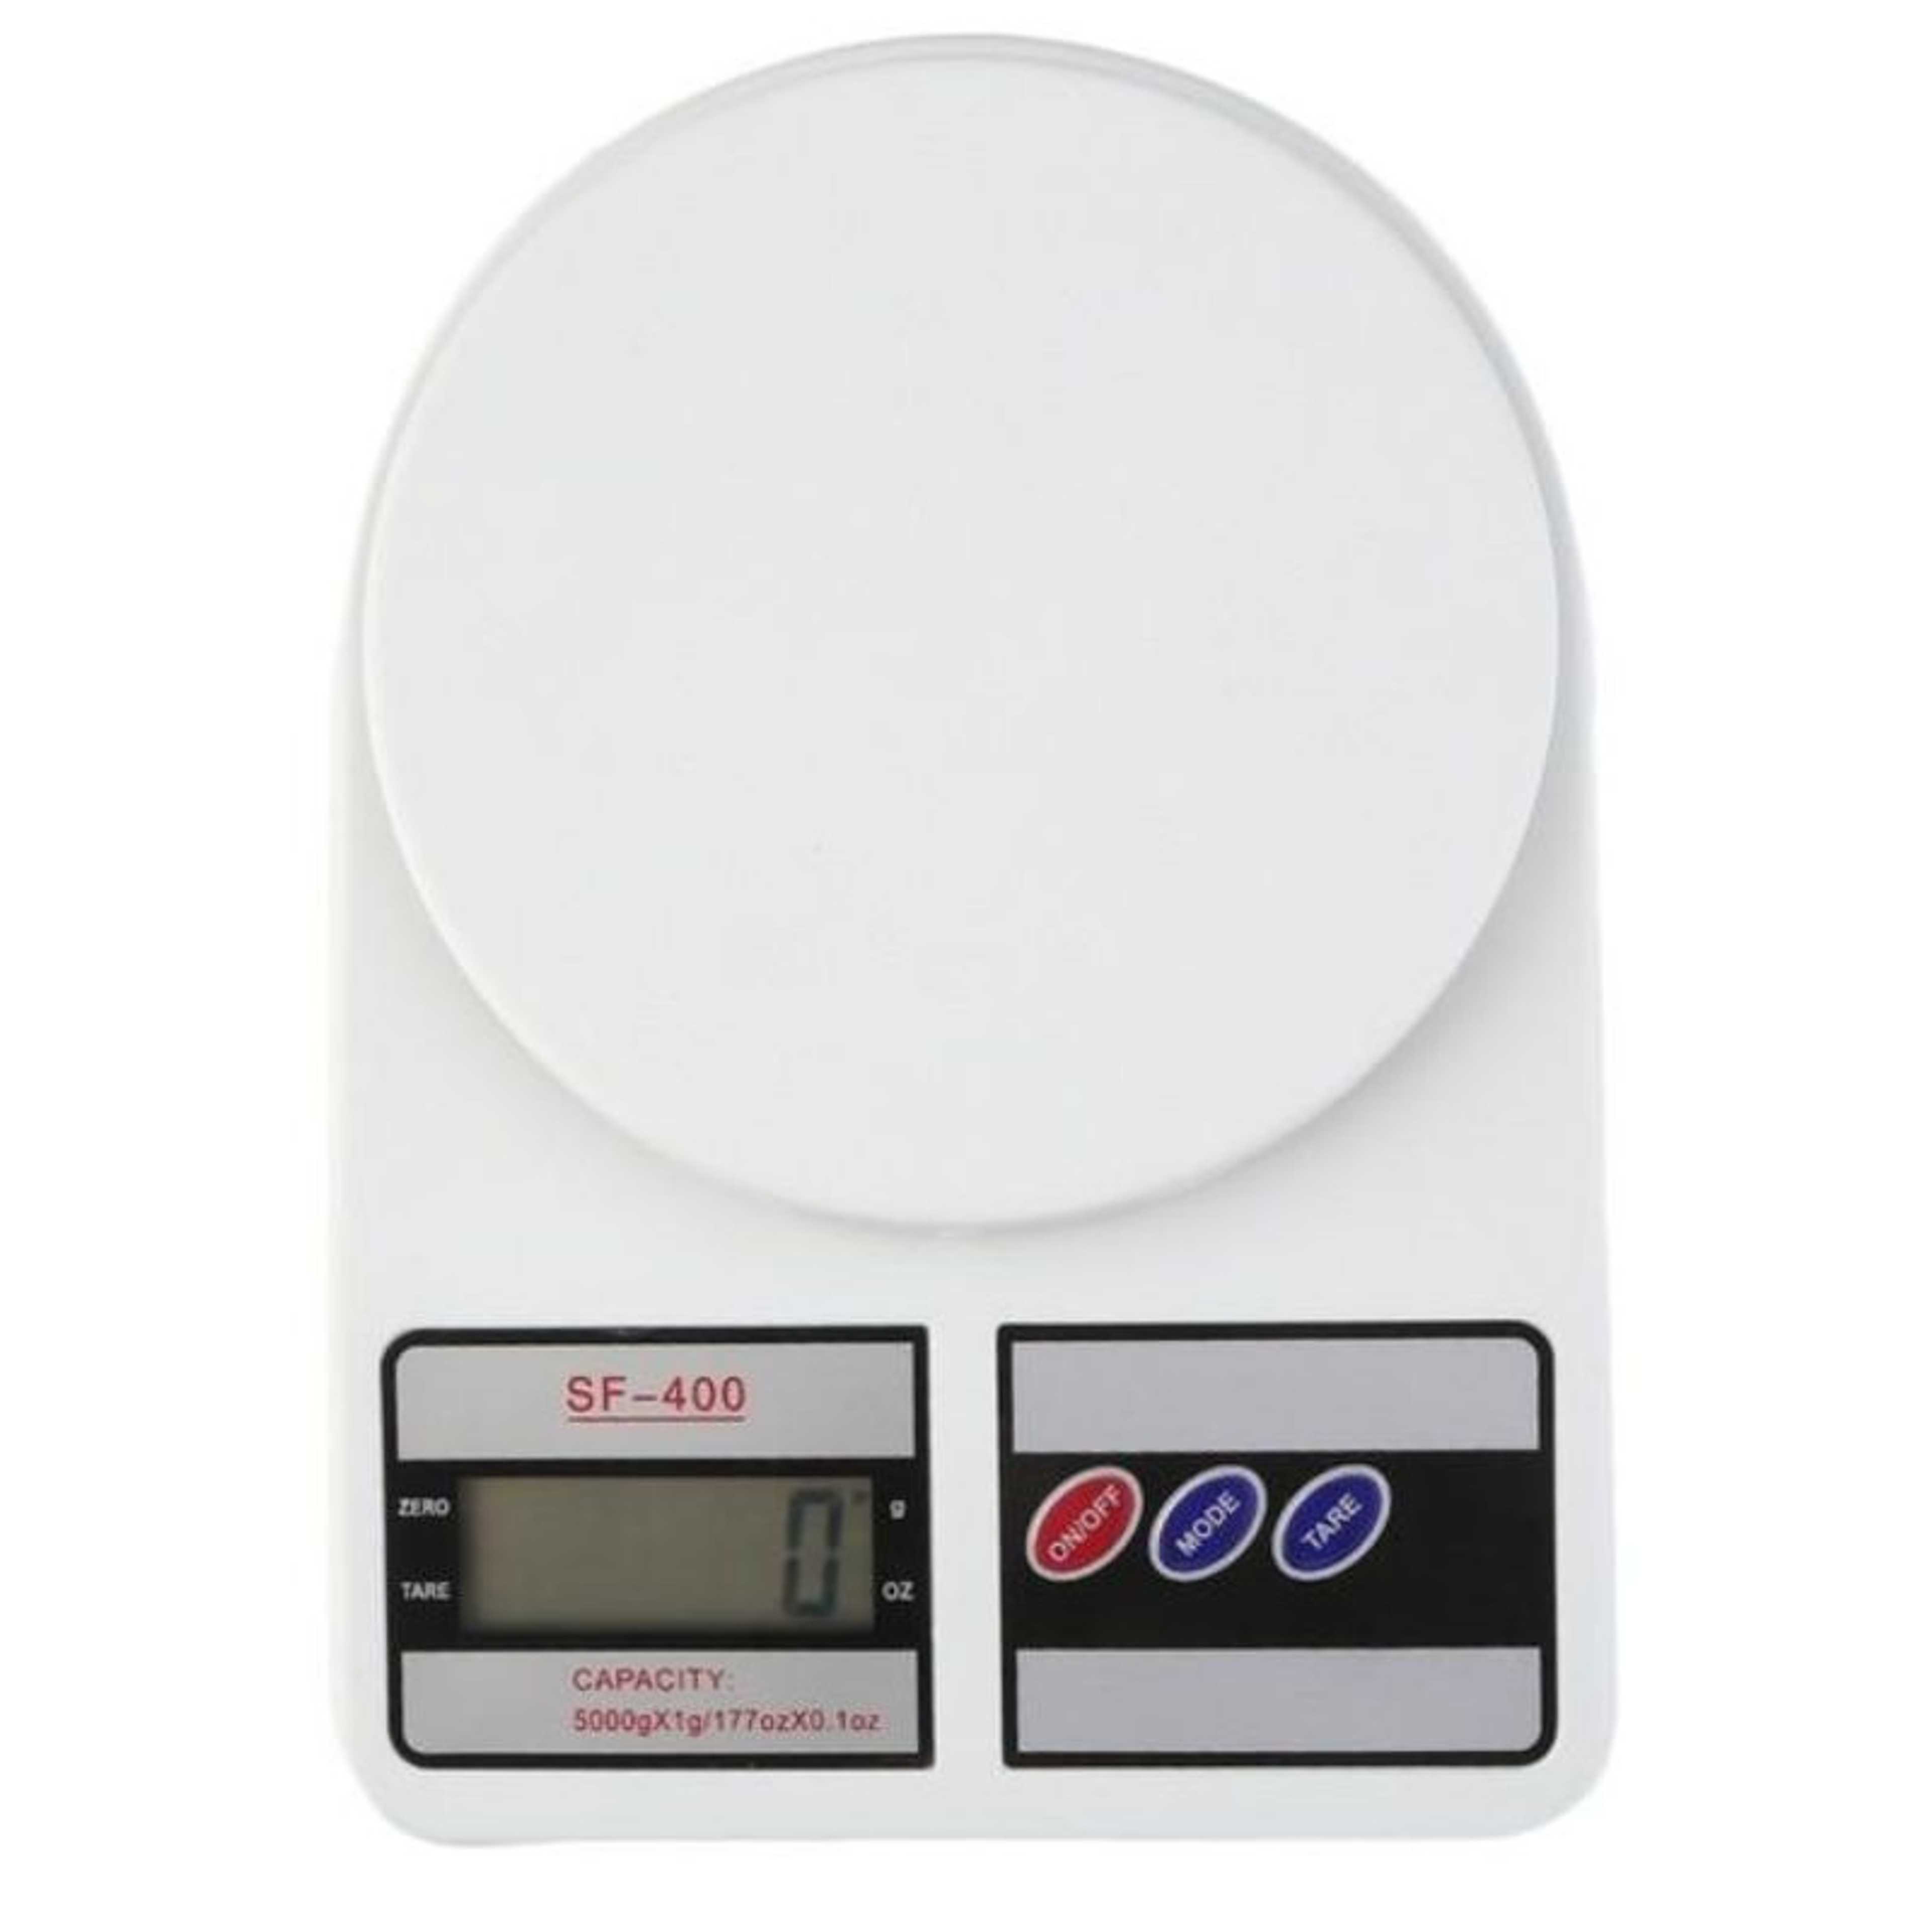 Digital LCD Display Kitchen Electronic Scales 